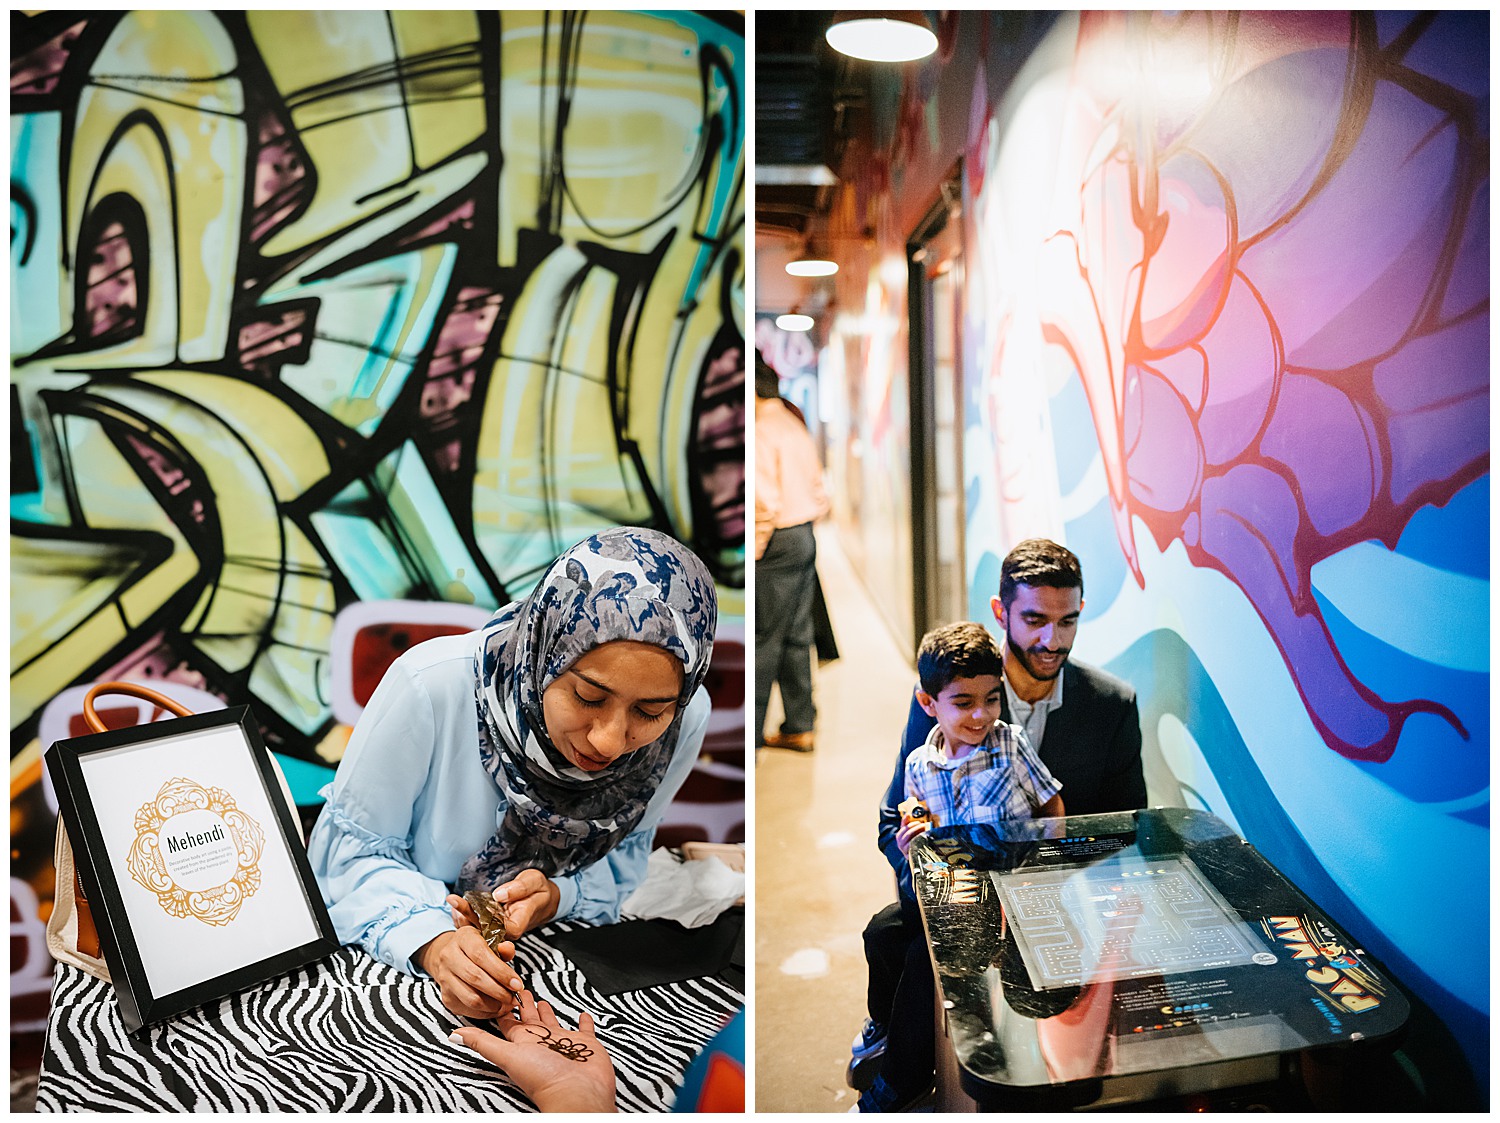 On the left a henna artists applies to a hand, on the right, a father and son play an arcade game